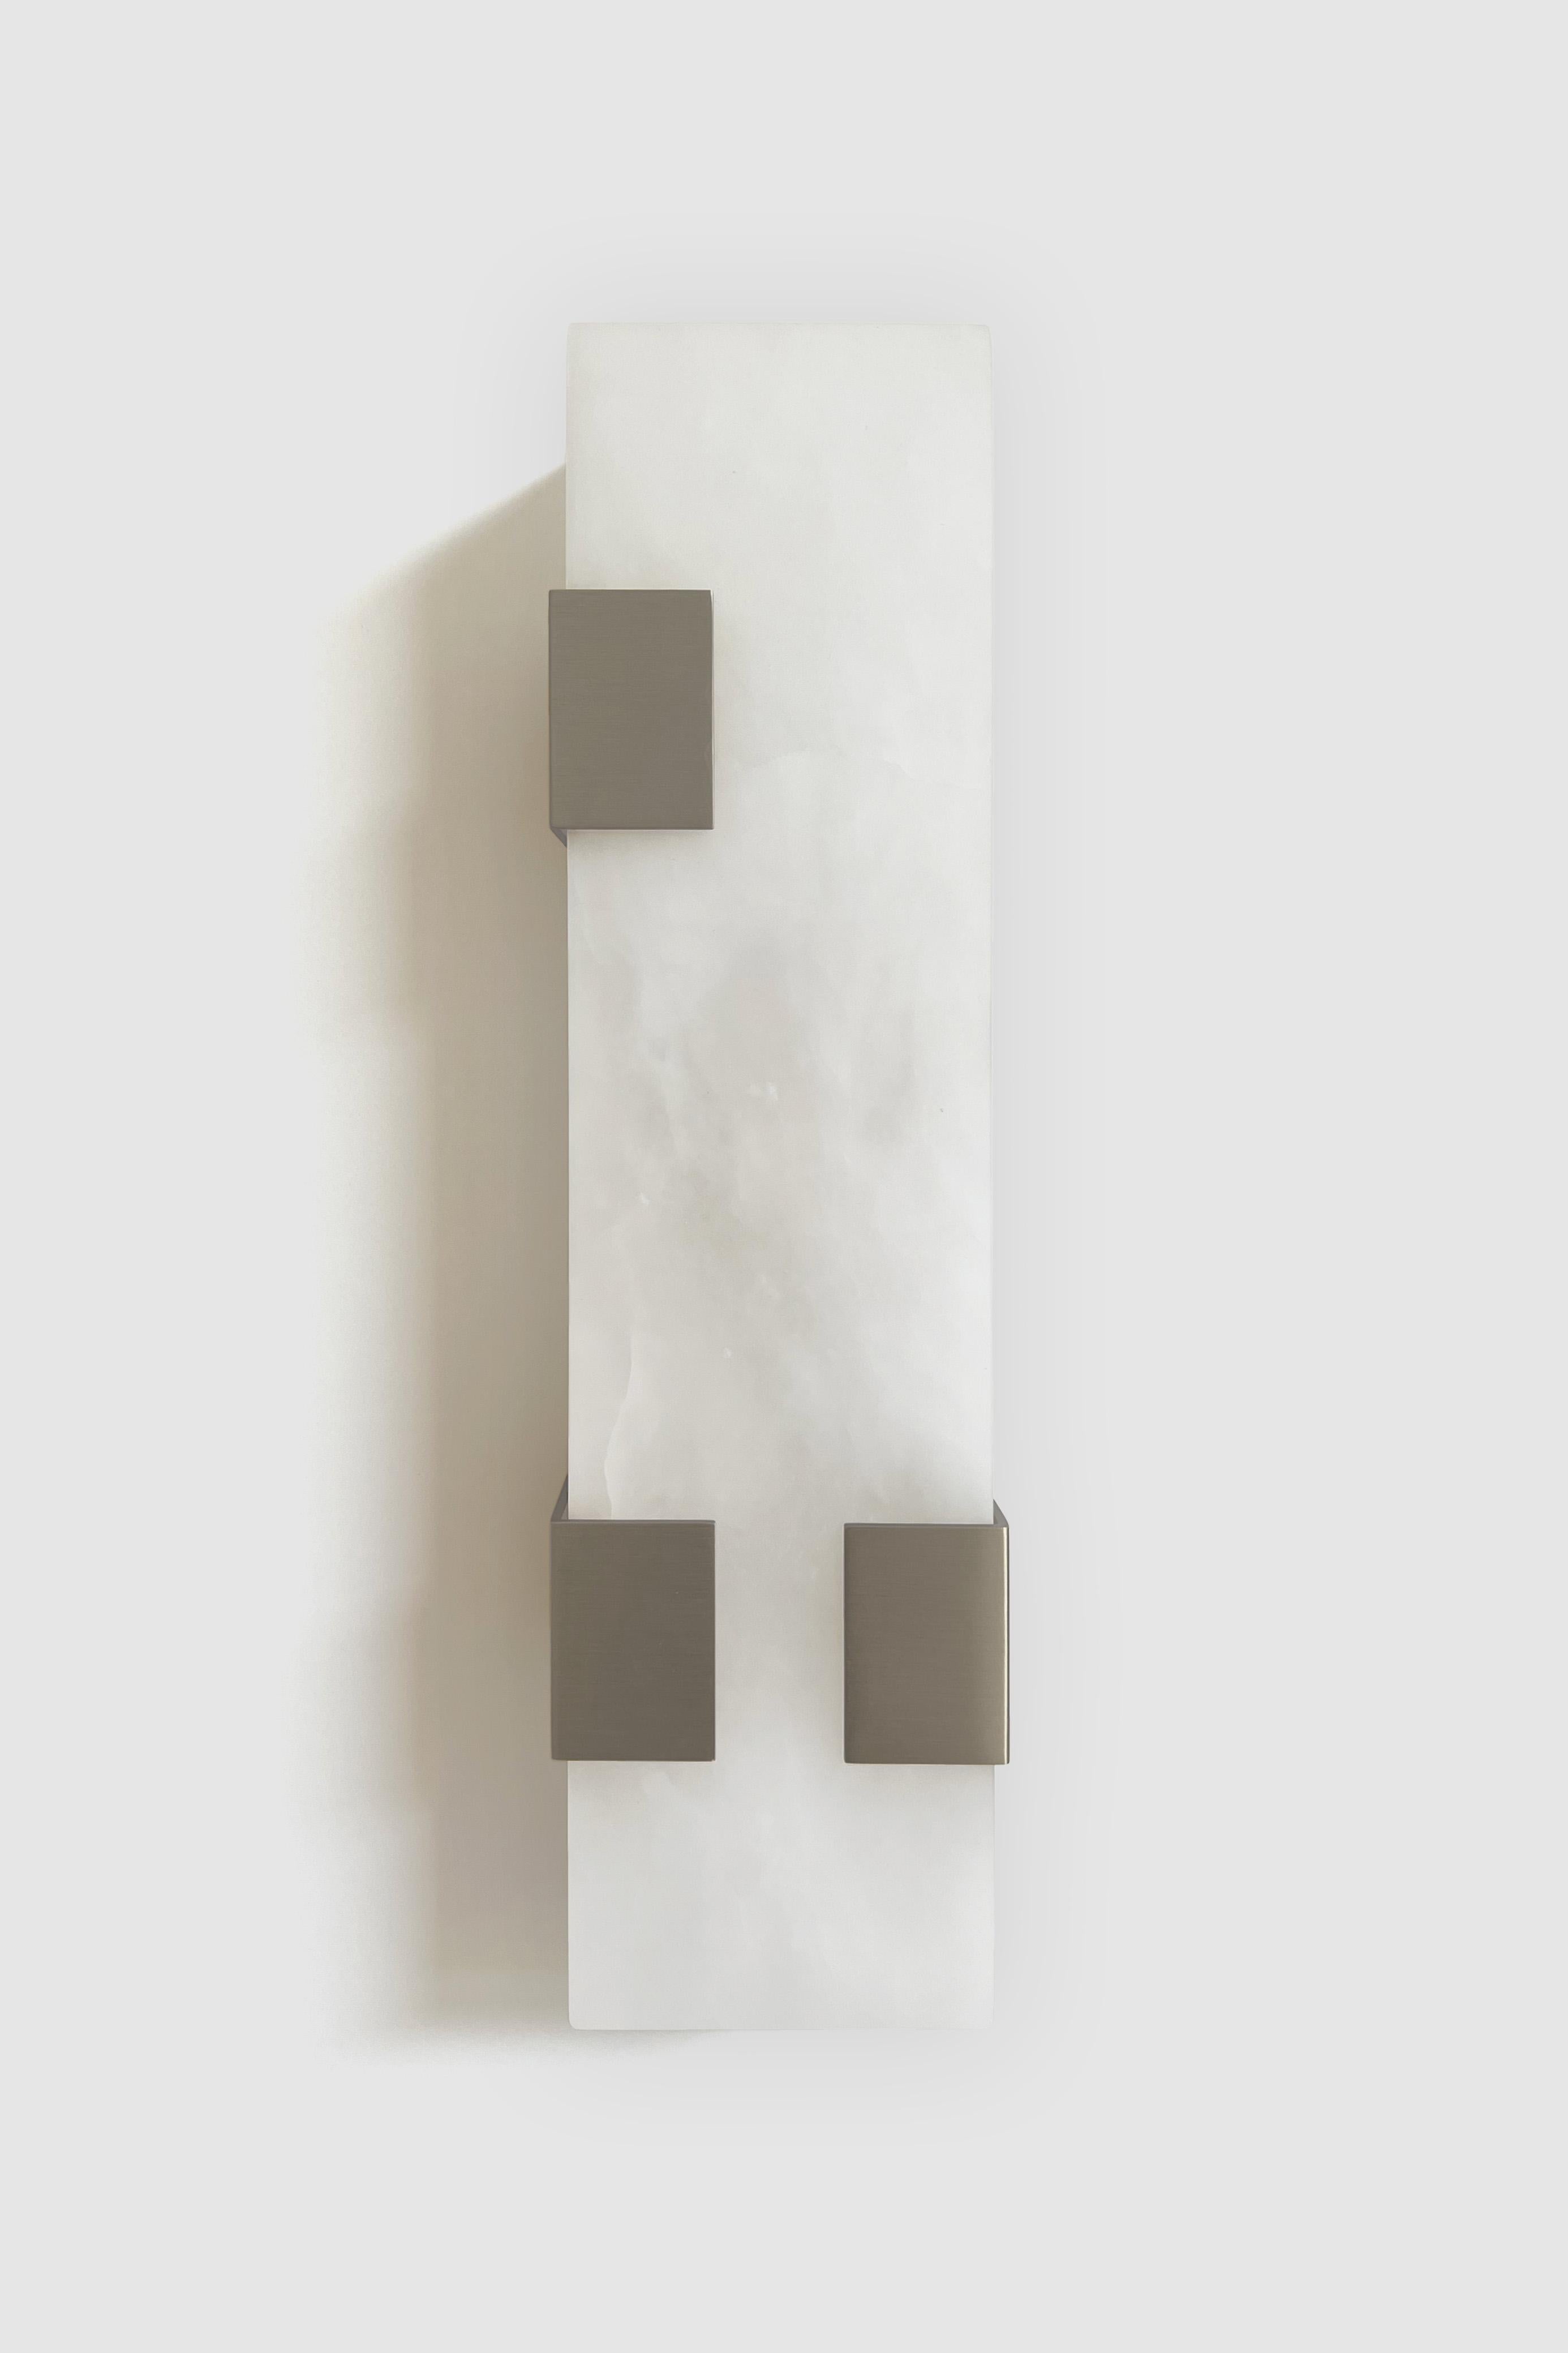 Orphan Work 003-3C Sconce
Shown in brushed nickel and alabaster
Available in brushed brass, brushed nickel and blackened brass
Measures: 19”H x 5 1/4”W x 3 7/8”D
Wall or ceiling mount
Vertical or horizontal
Plug-in by request
1-4 adjustable clips
UL